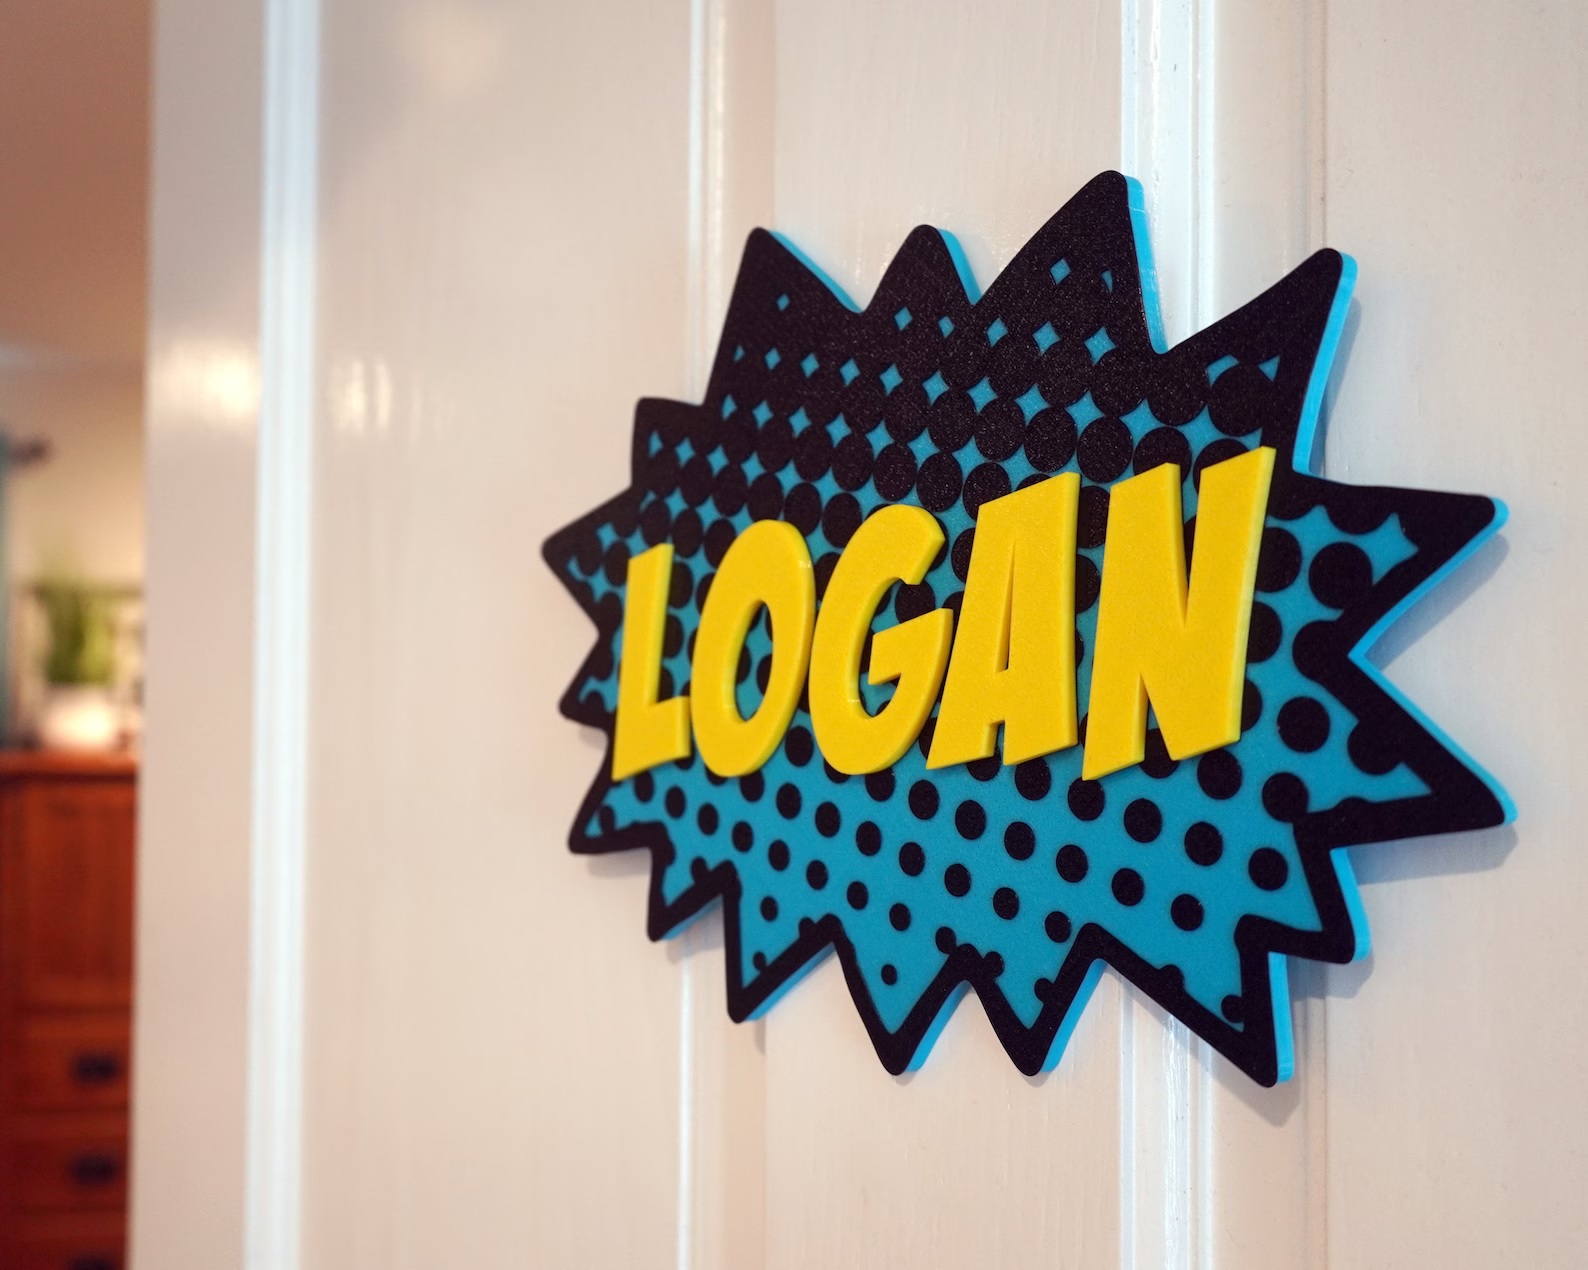 A blue sign shaped like the flash that accompanies a comic book-style onomatopoeia hangs from a wall. The name "Logan" is printed across it in bold yellow letters.